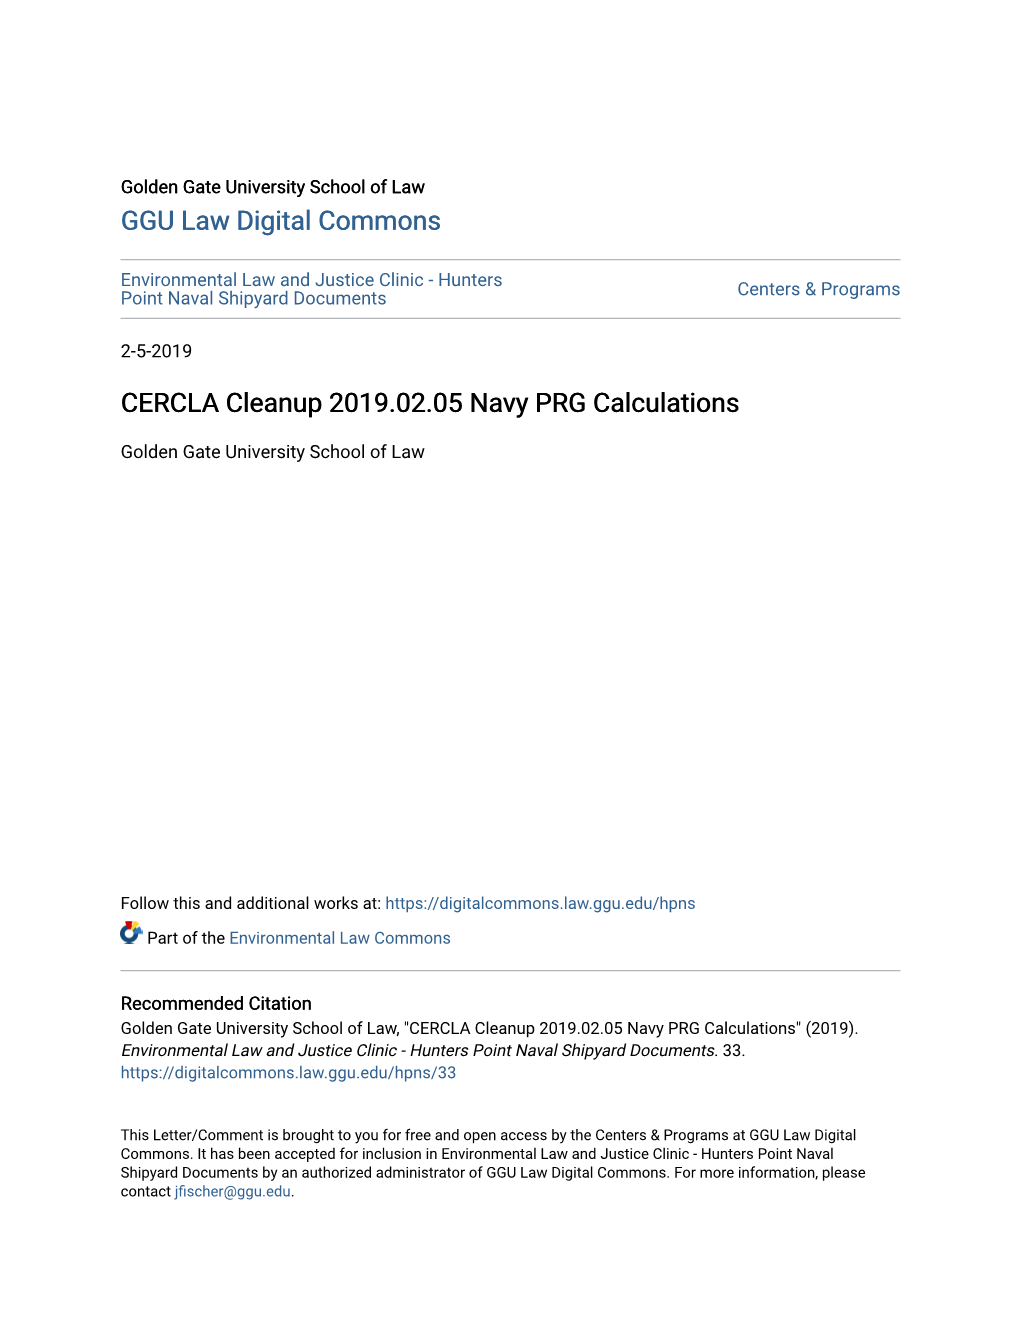 CERCLA Cleanup 2019.02.05 Navy PRG Calculations